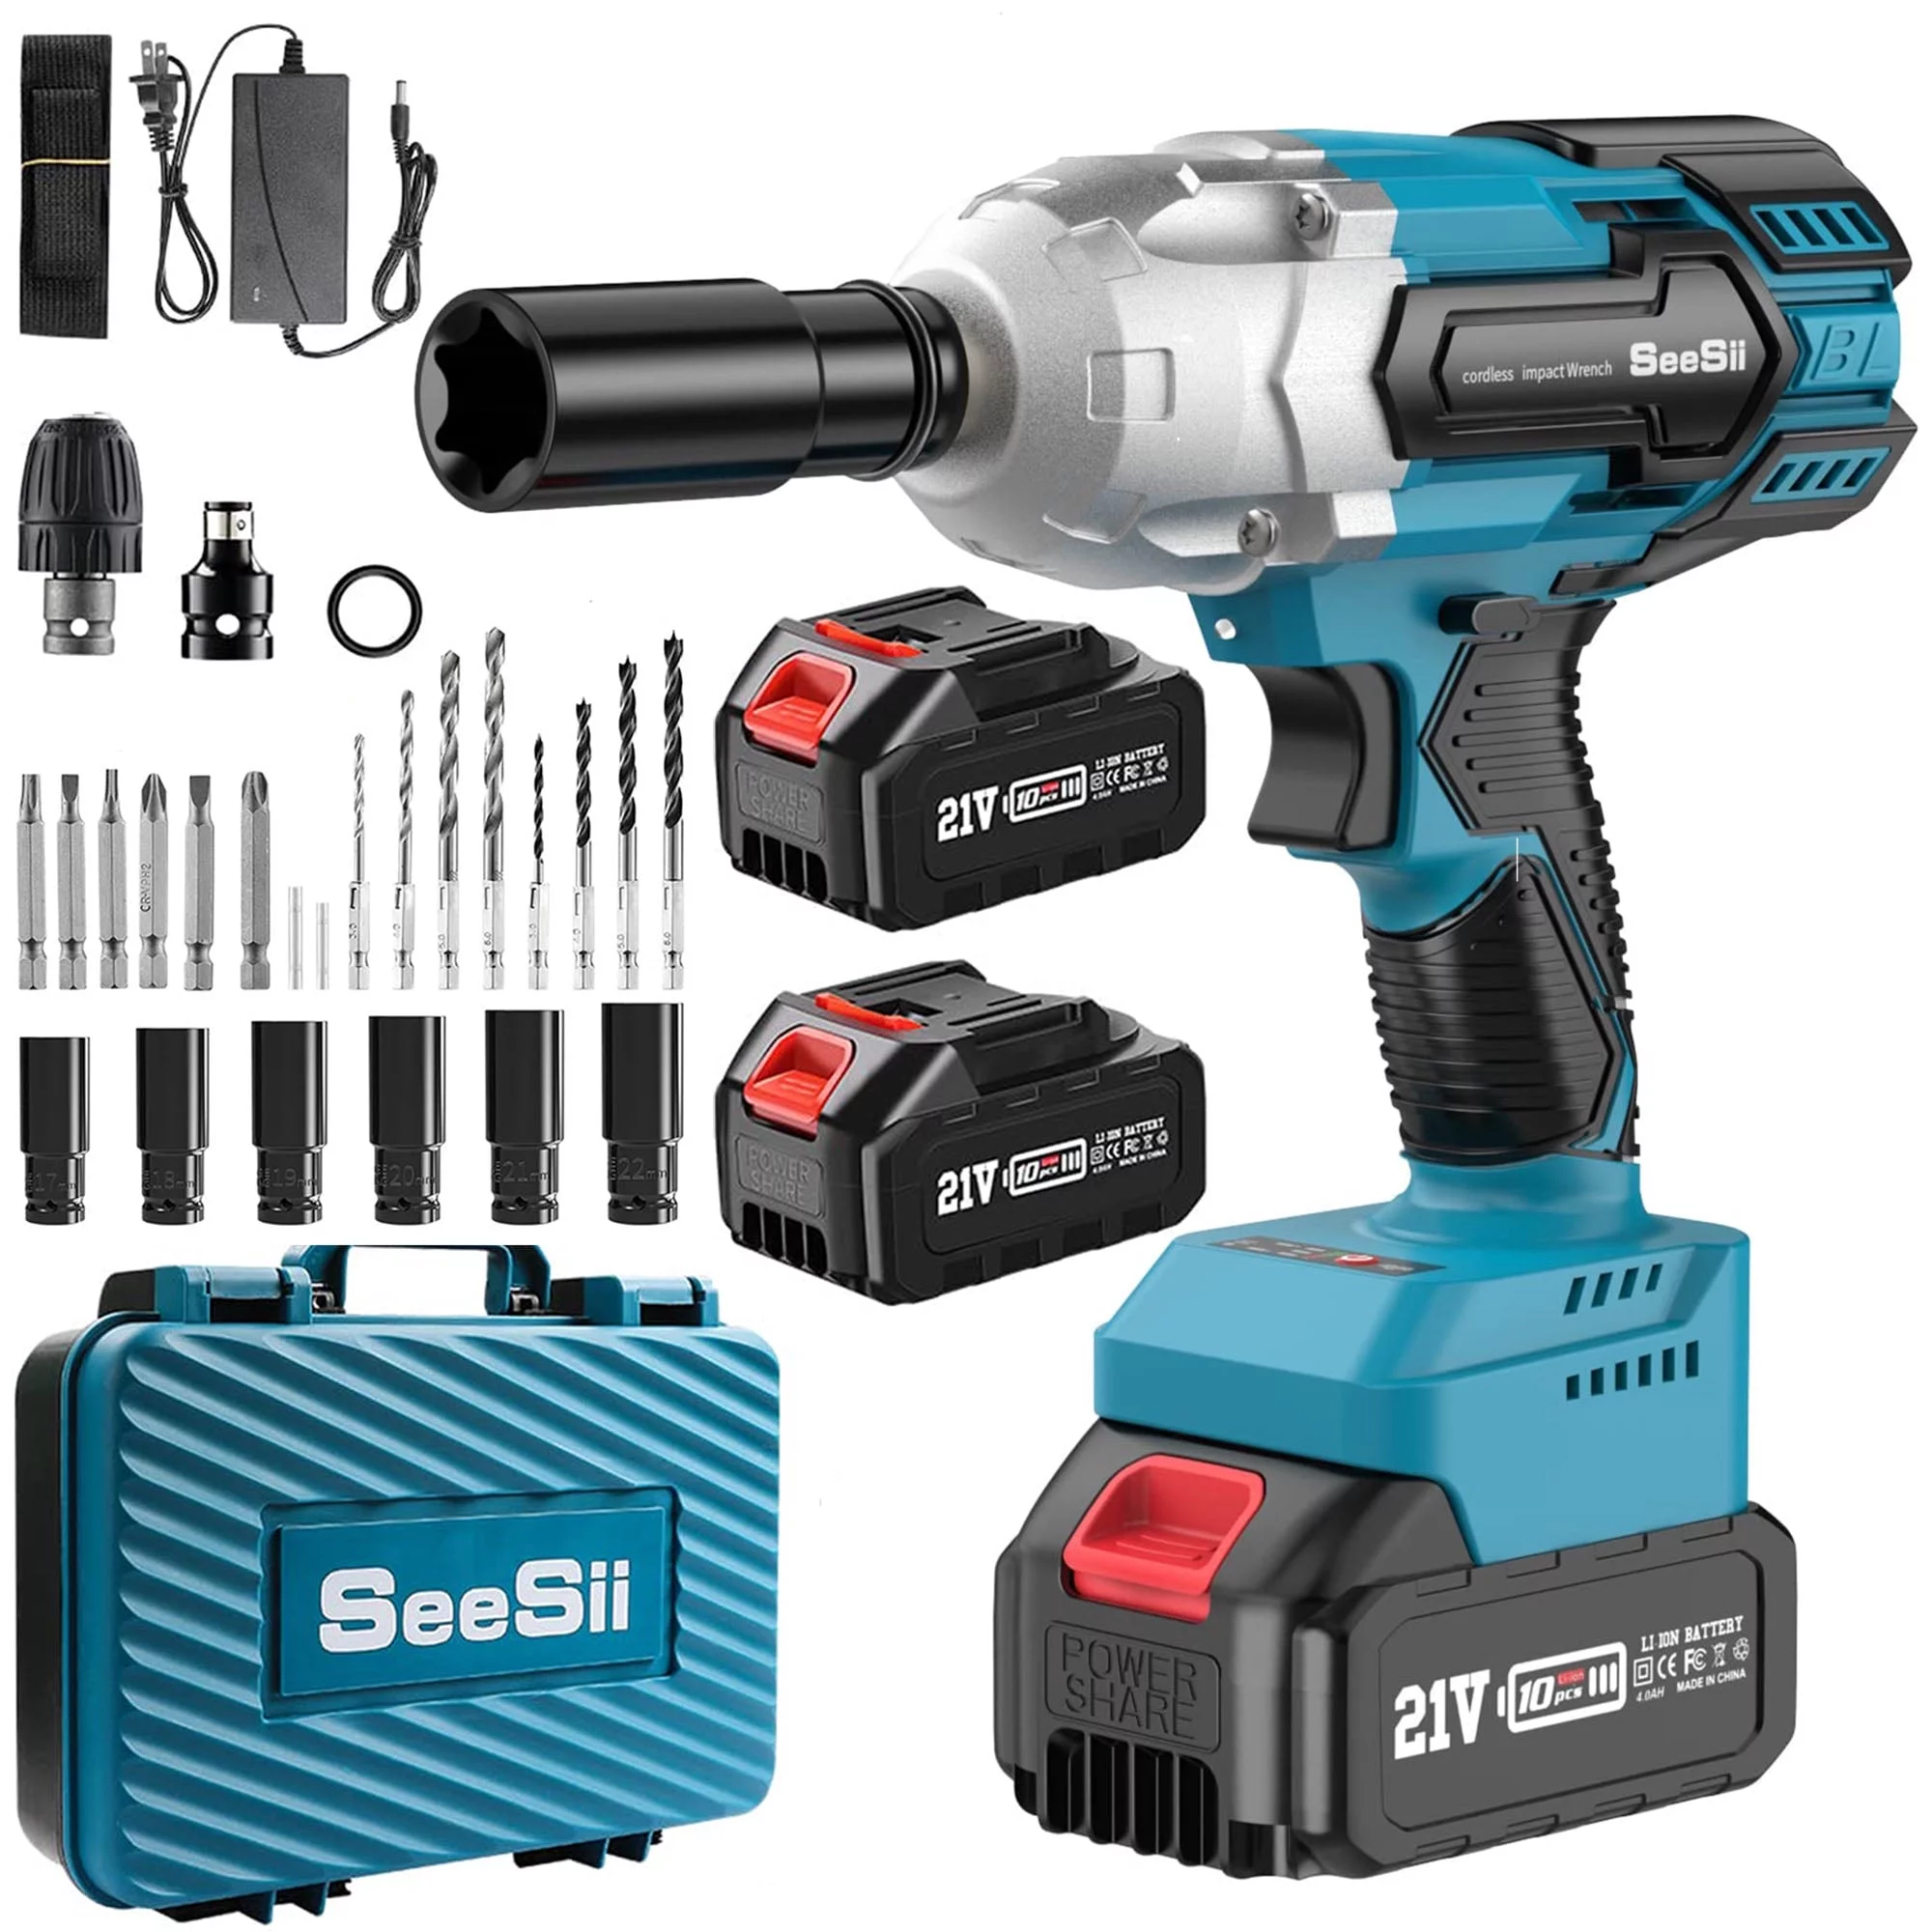 Seesii Cordless Impact Wrench review by Torque Test Channel